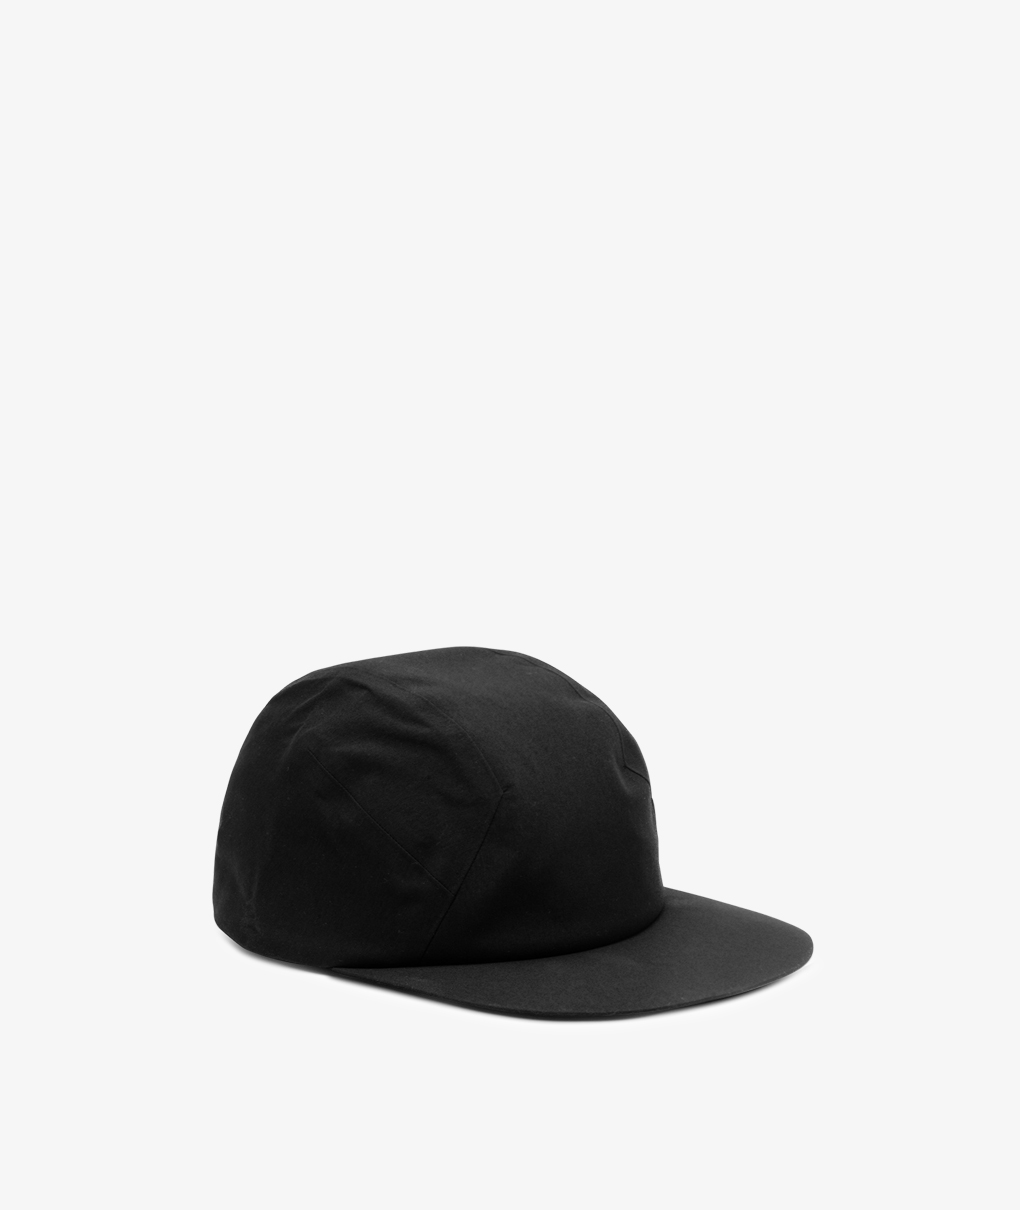 Norse Store | Shipping Worldwide - Veilance STEALTH CAP - Black